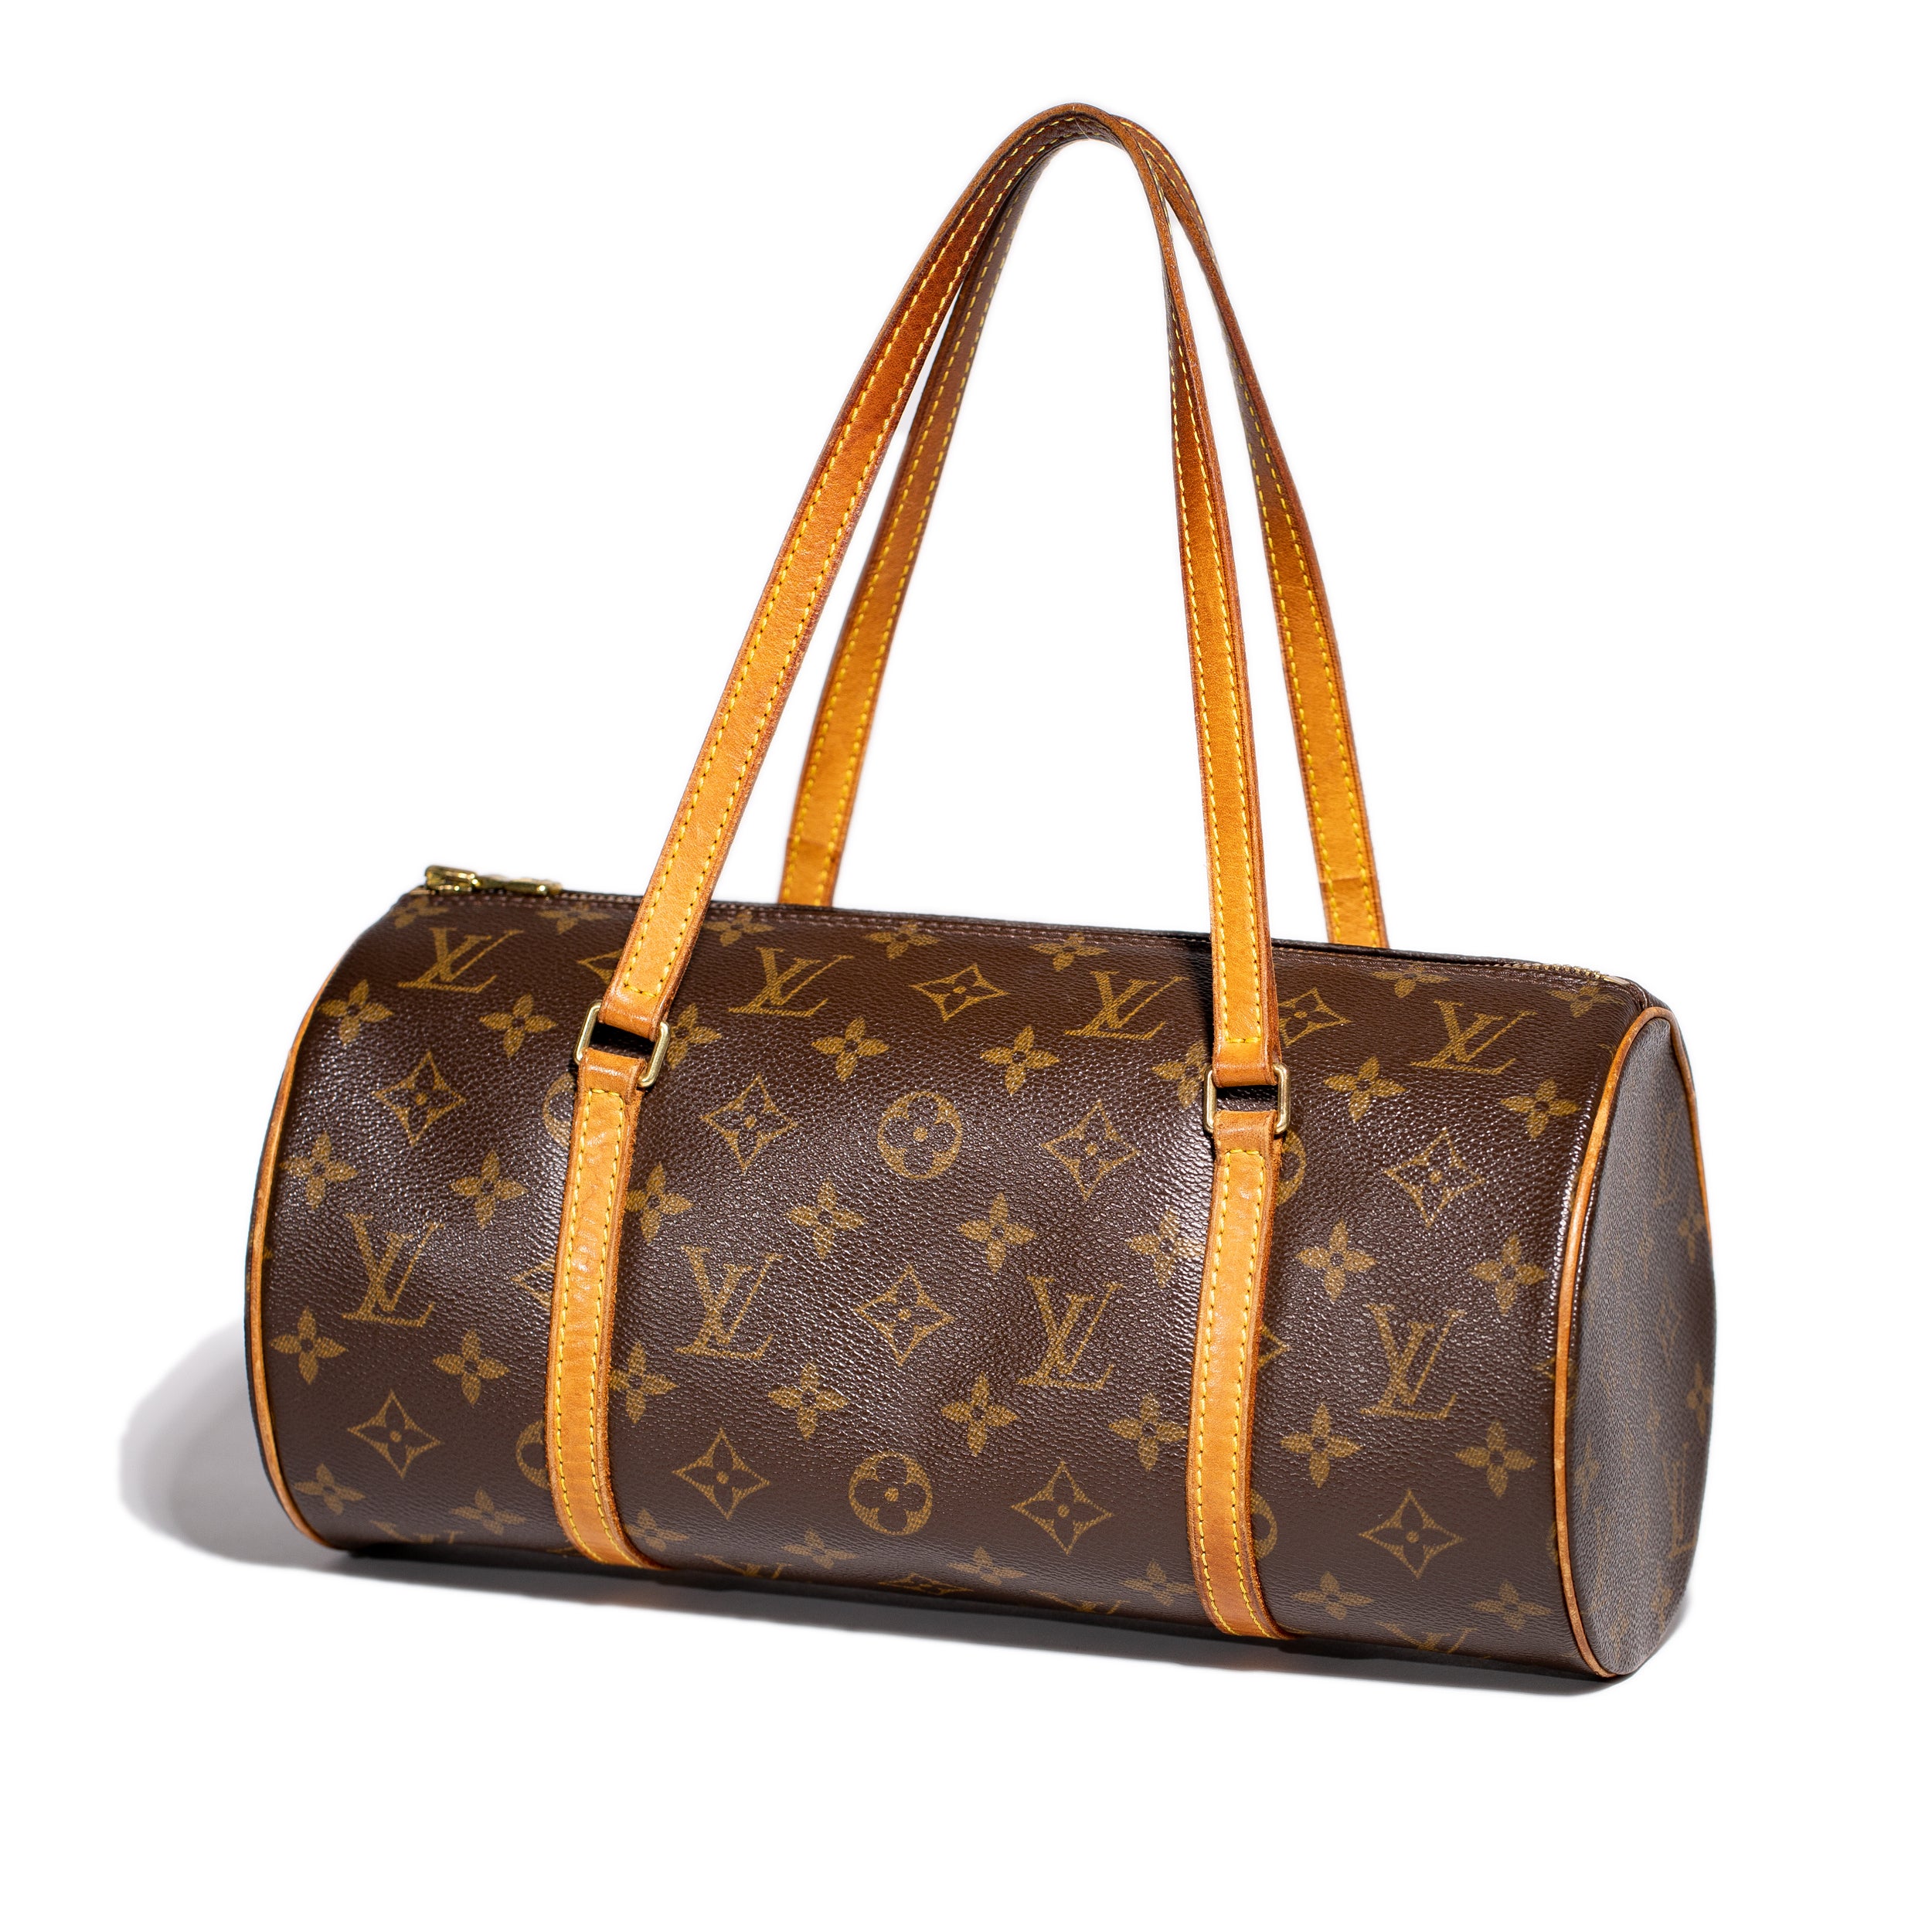 The History Of Louis Vuitton